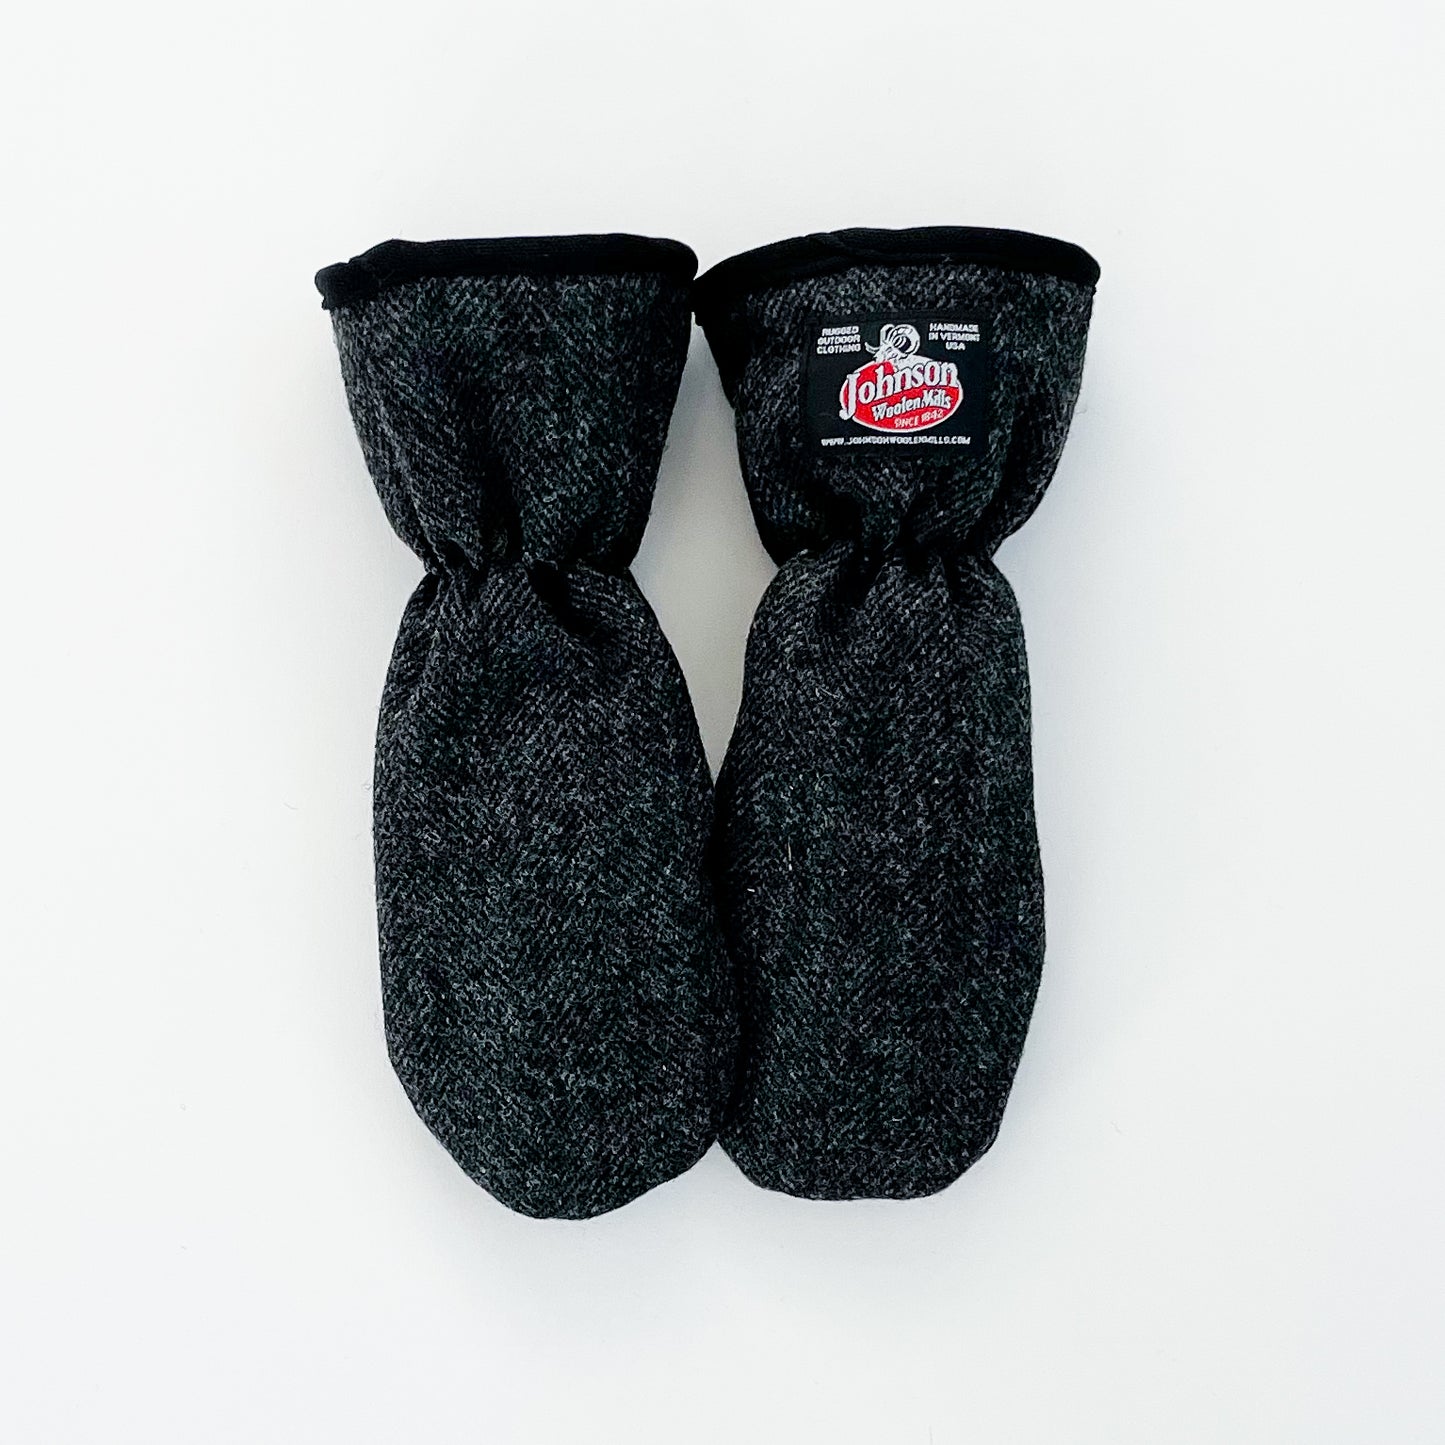 Johnson Woolen Mills mittens - grey herringbone with black piping - logo patch - front view 